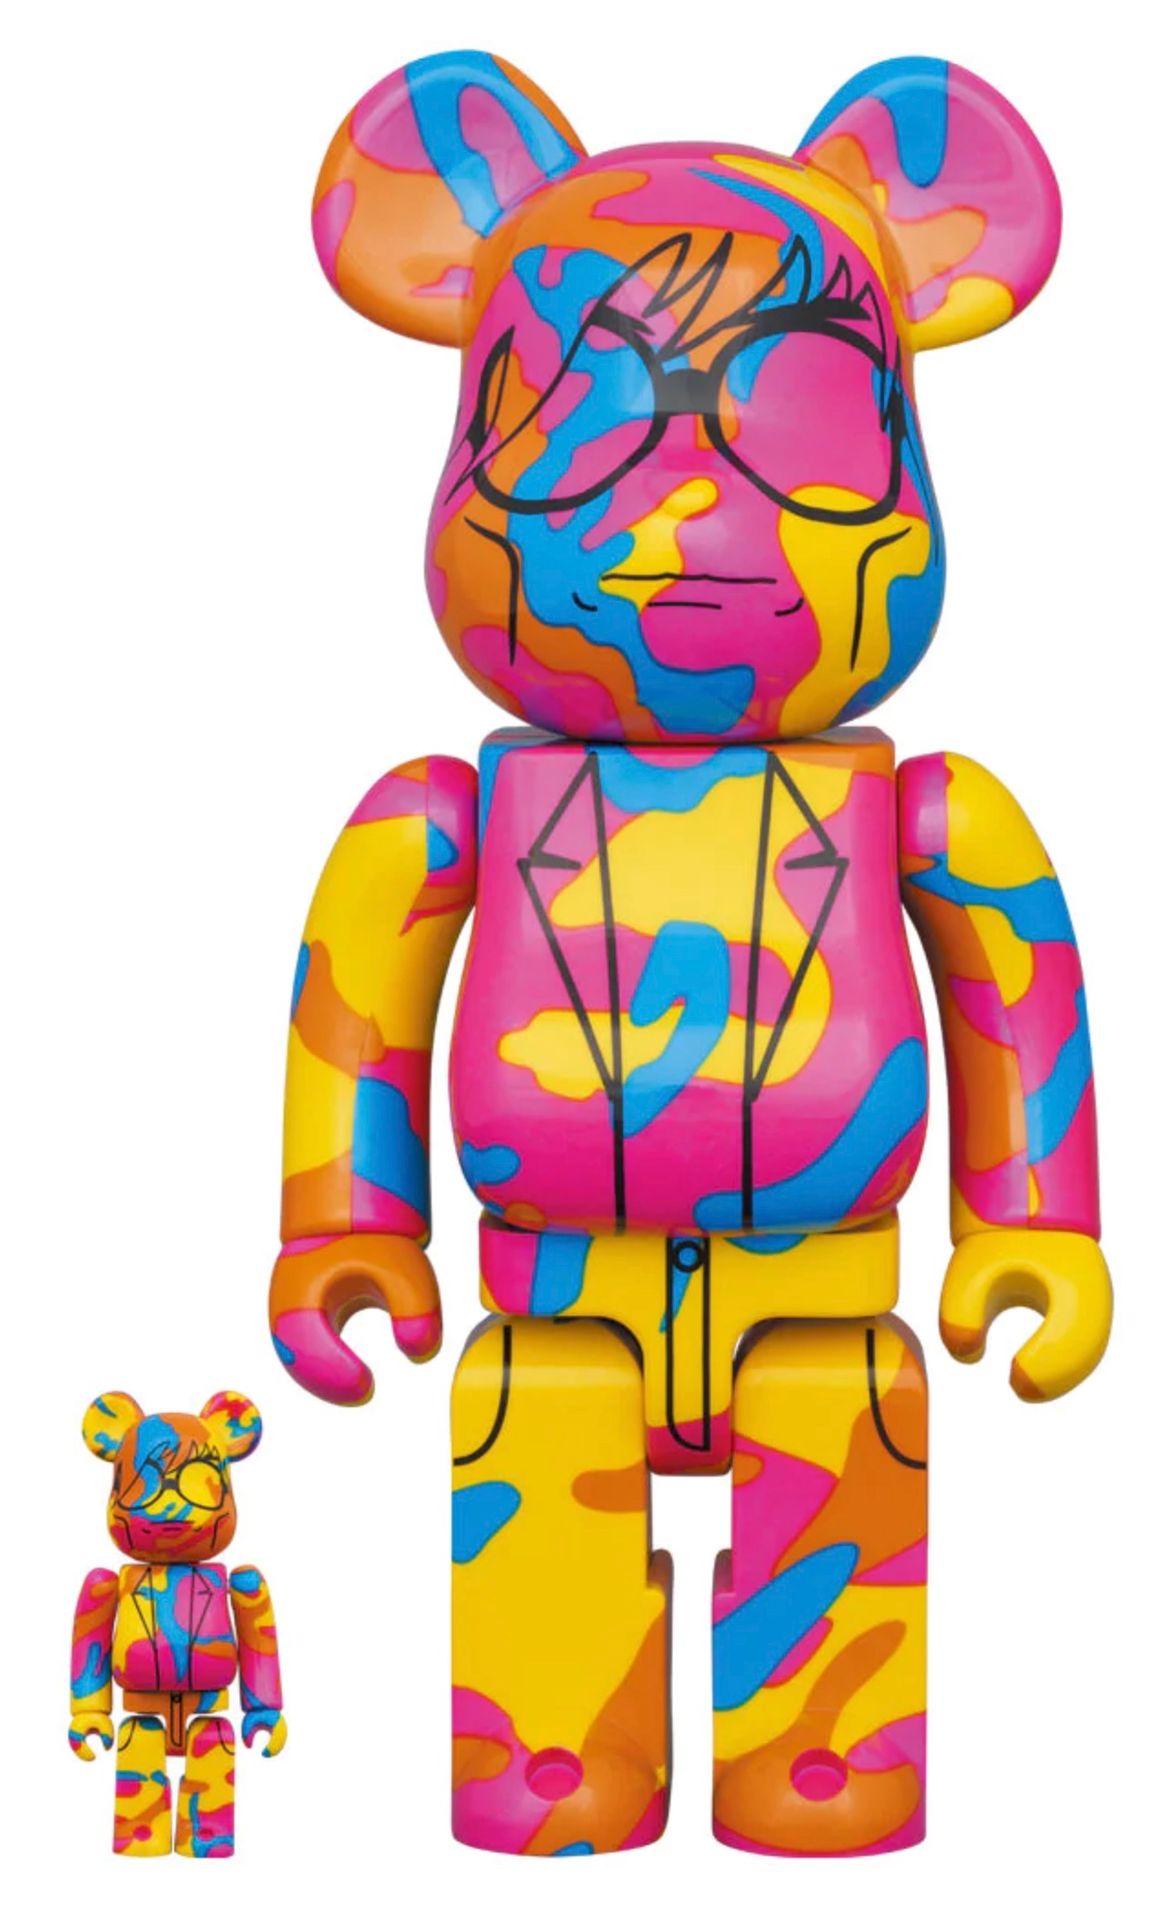 BE@RBRICK BE@RBRICK
Andy Warhol 
"Especial
100％ & 400％